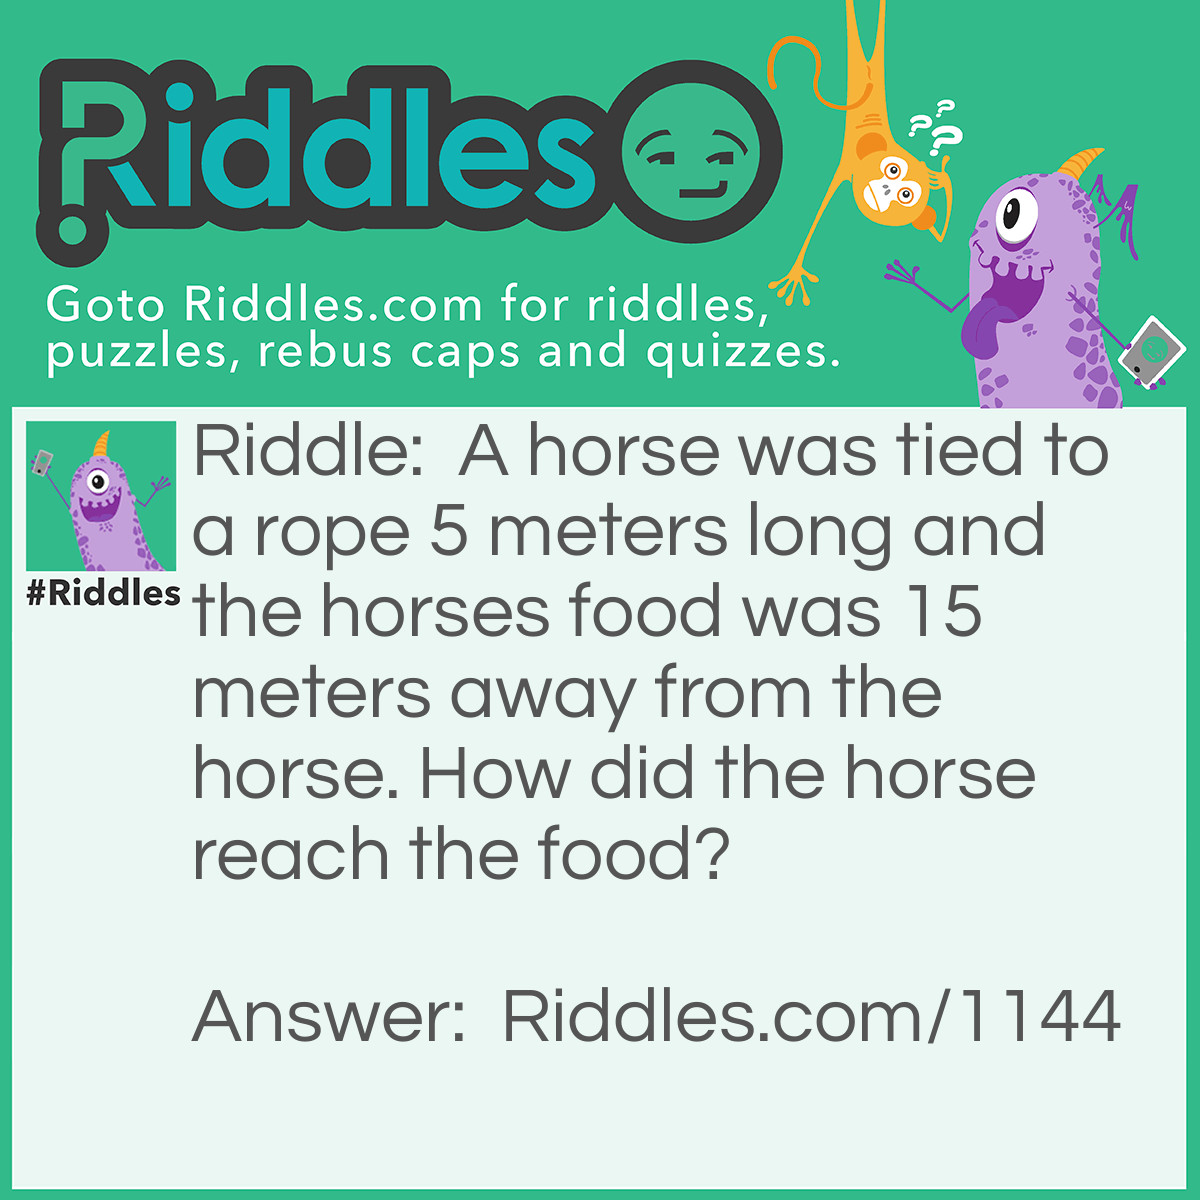 Riddle: A horse was tied to a rope 5 meters long and the horse's food was 15 meters away from the horse. How did the horse reach the food? Answer: The rope wasn't tied to anything so he could reach the food.